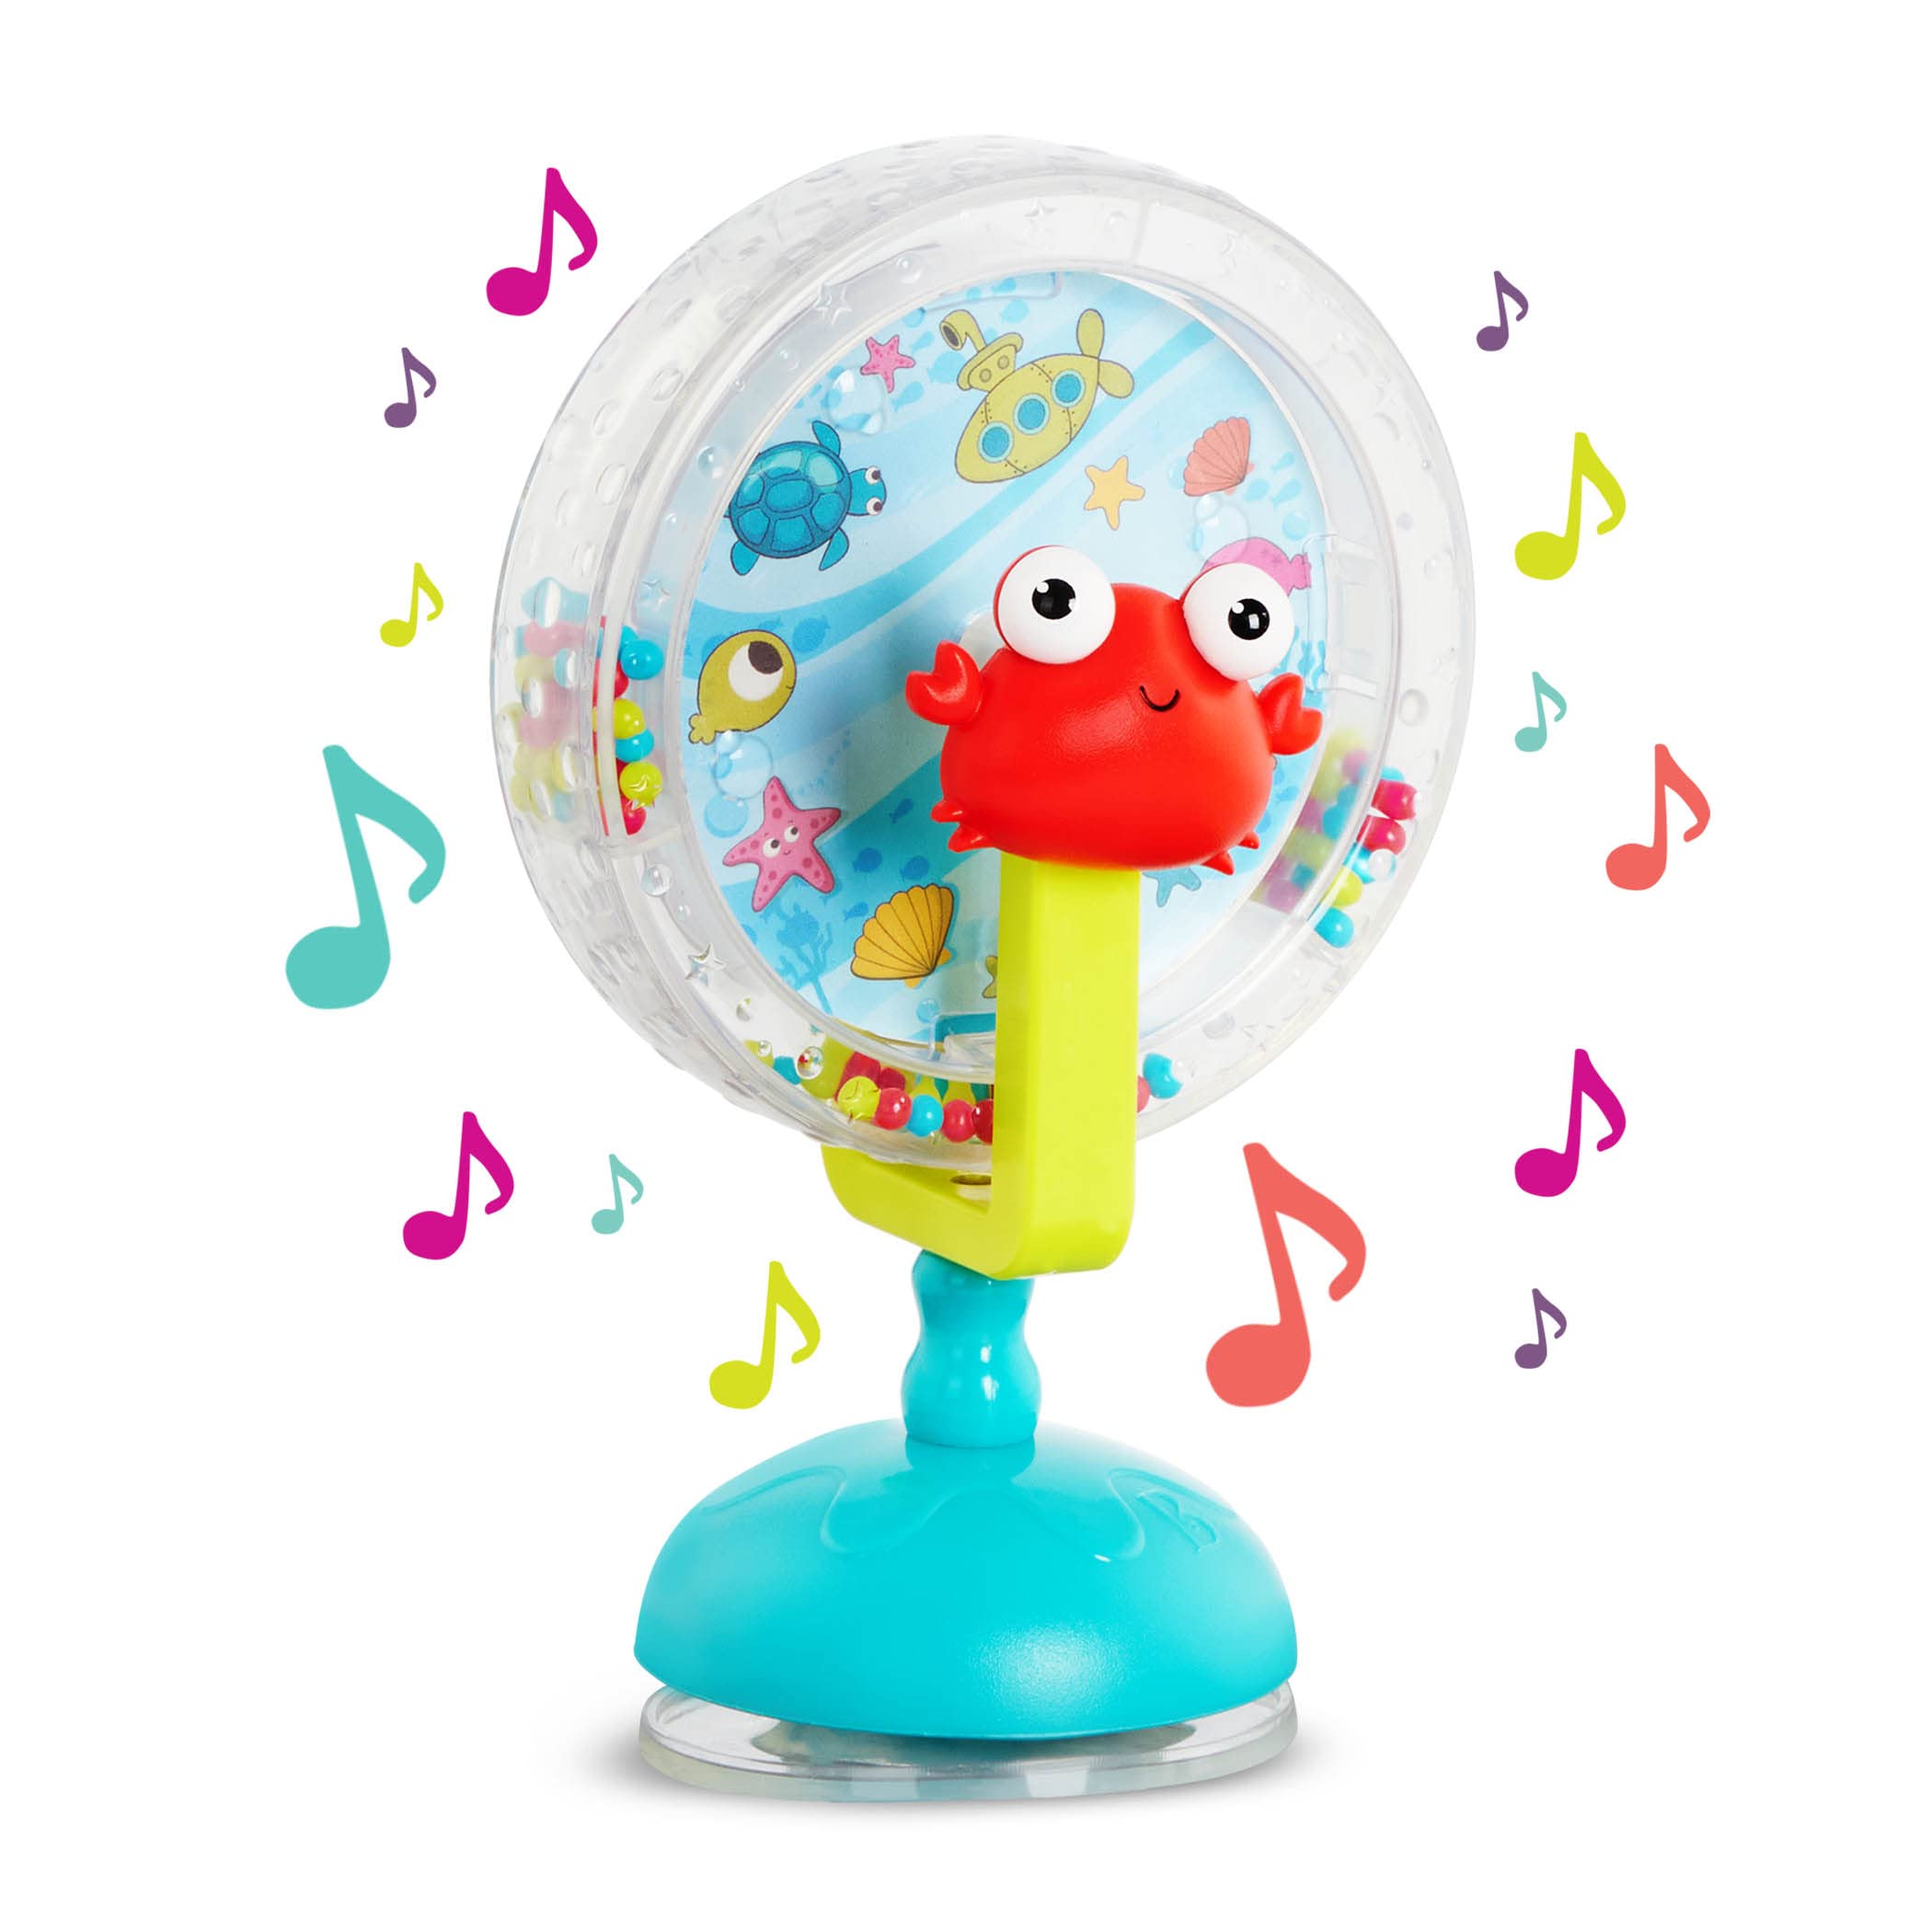 B. Baby – Baby Ferris Wheel Toy – High Chair Toy – Musical Toy with Songs & Sounds – Educational & Developmental – 6 Months + – Whirly Wheel